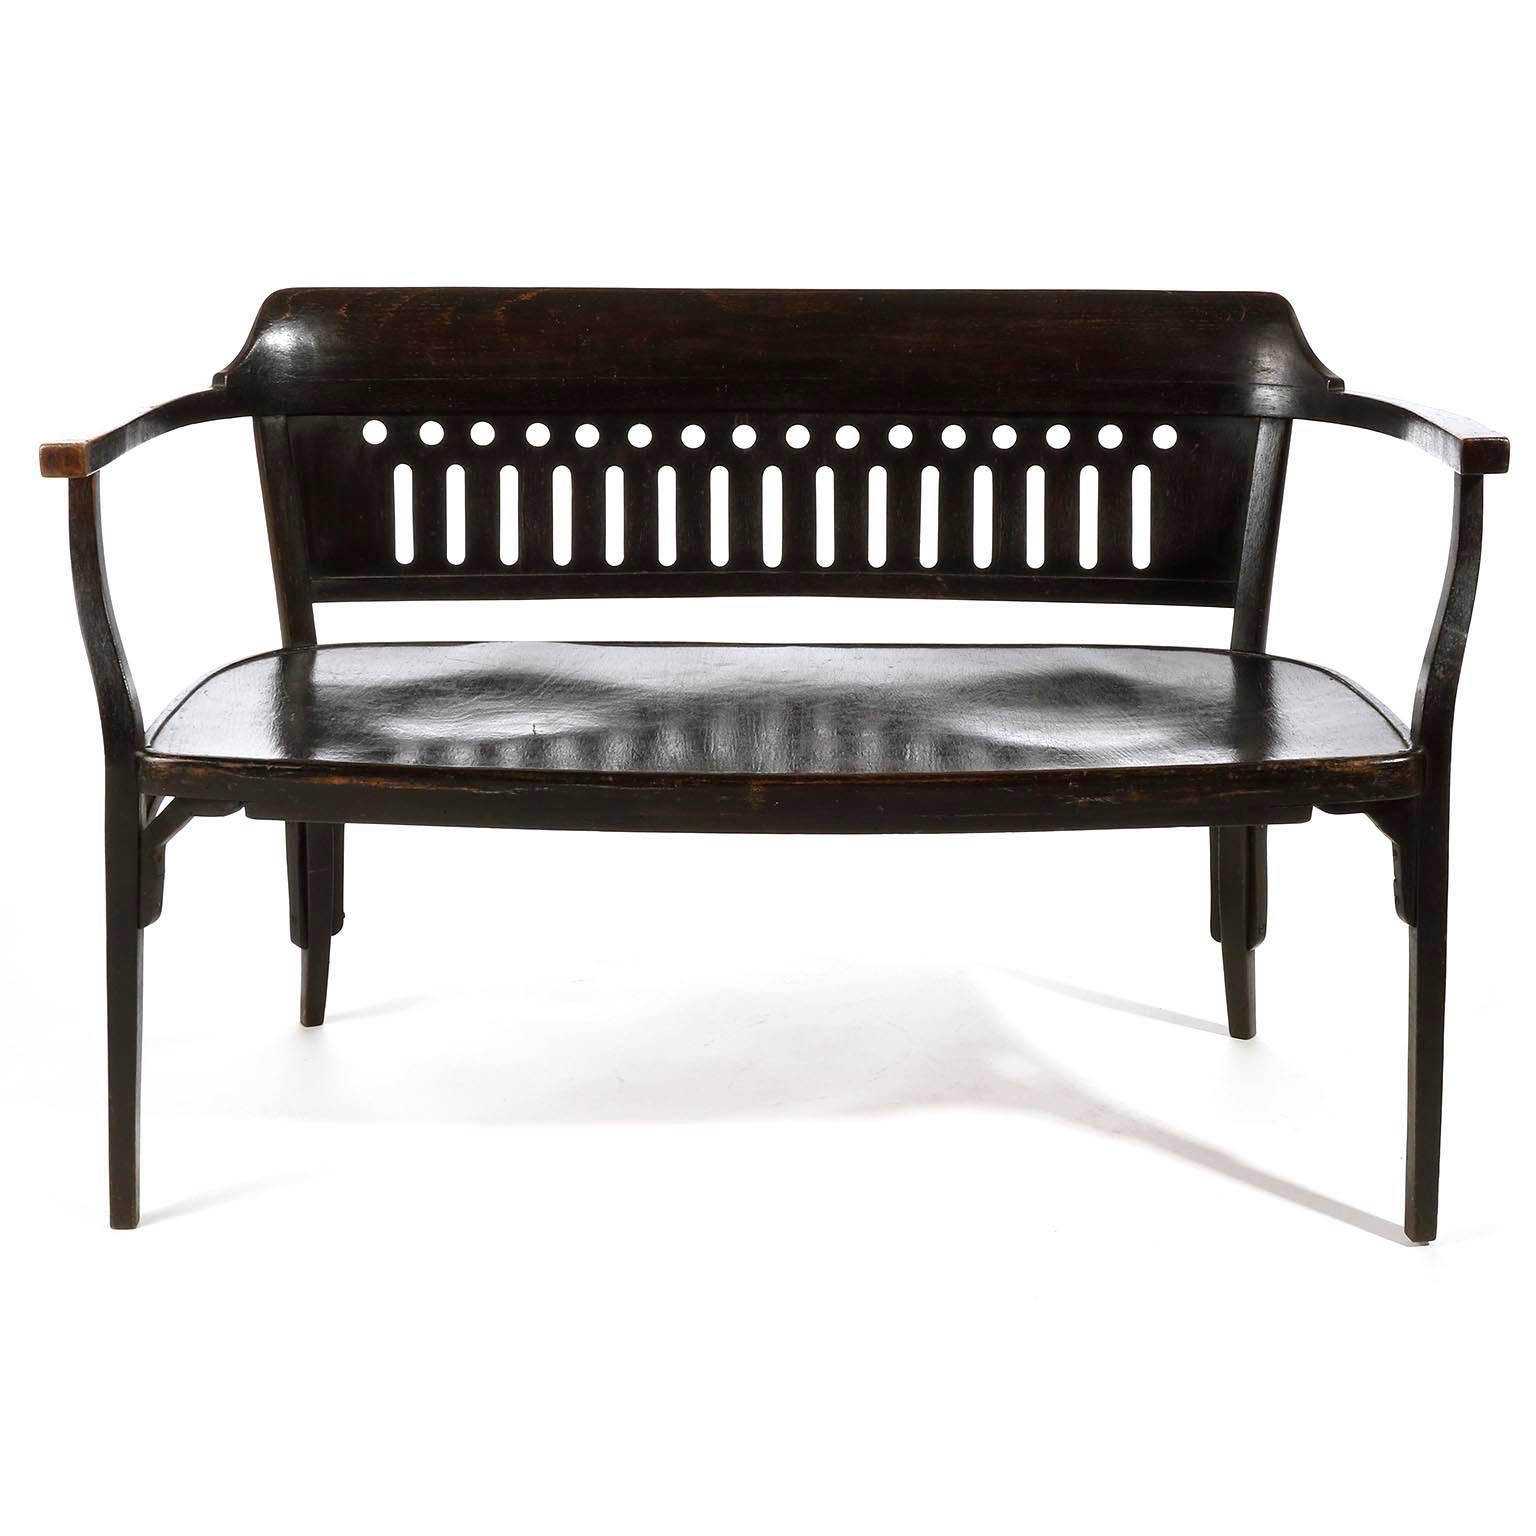 A Vienna Secession bentwood settee by Otto Wagner and manufactured by Thonet, Austria, circa 1900.

This settee is an authentic piece which is in great original condition with nice patina. It is made of dark brown (almost black) stained beech wood